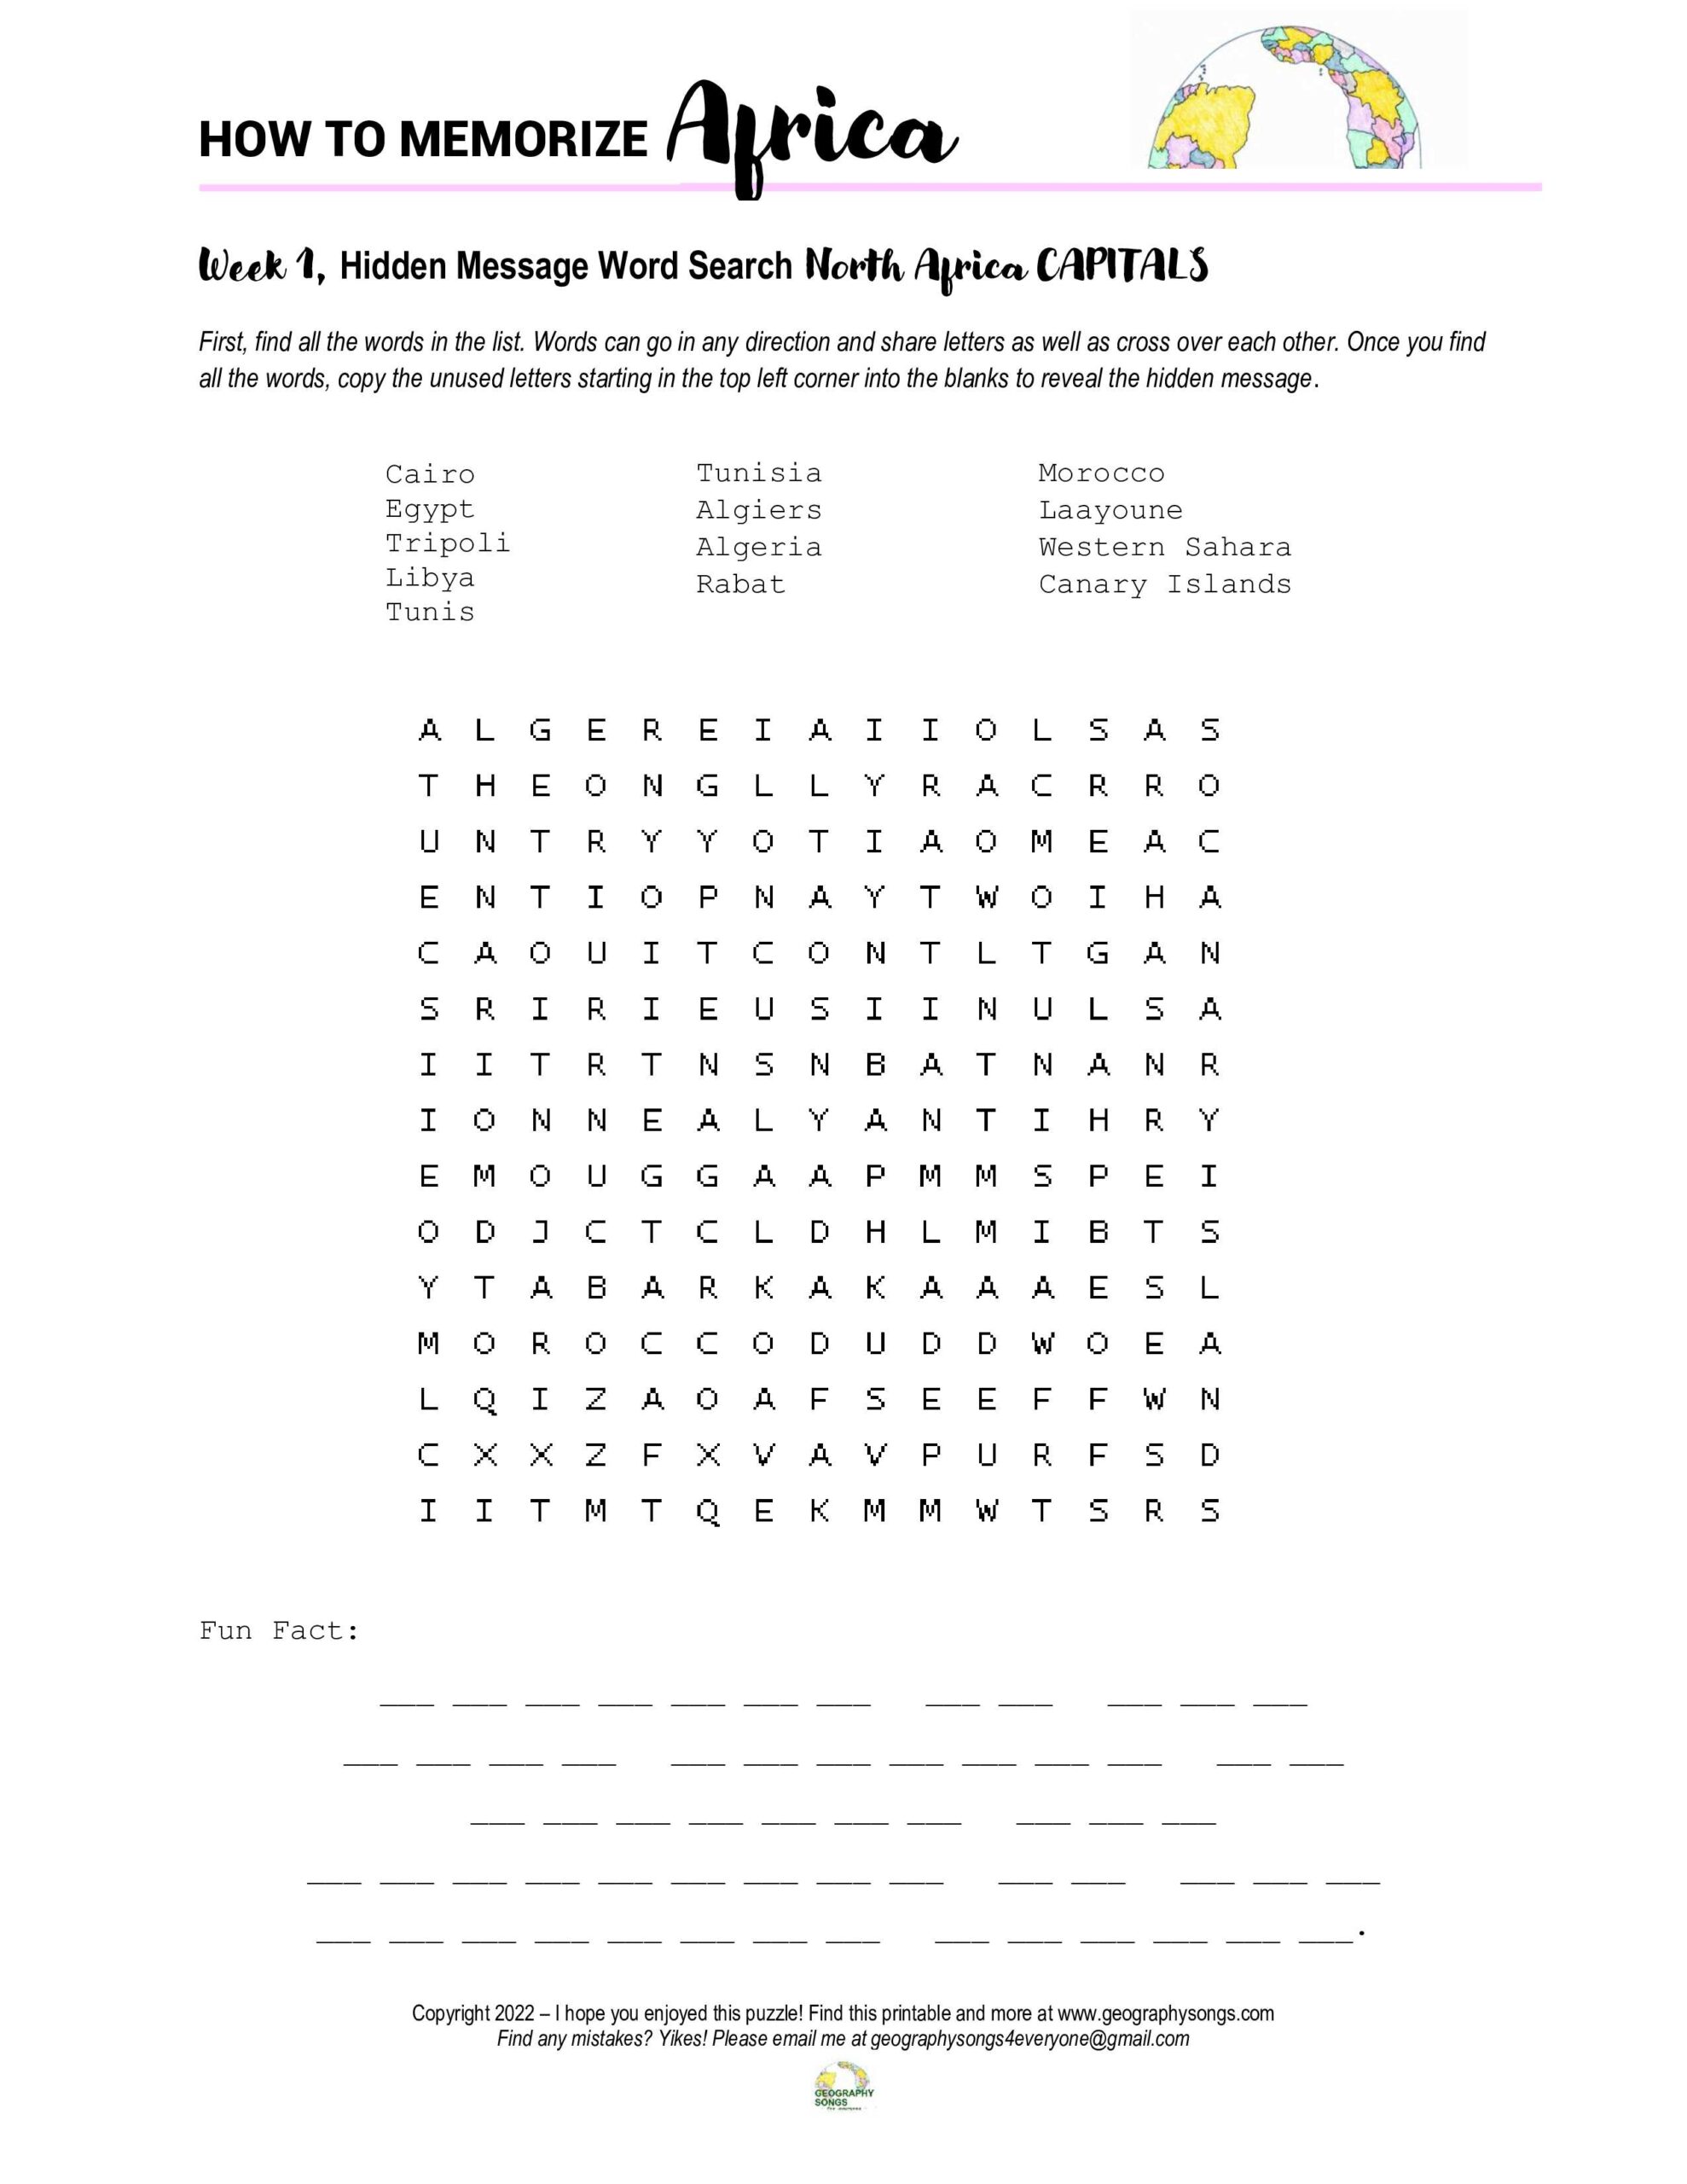 Africa-Capitals-HiddenMessage-WordSearch-0